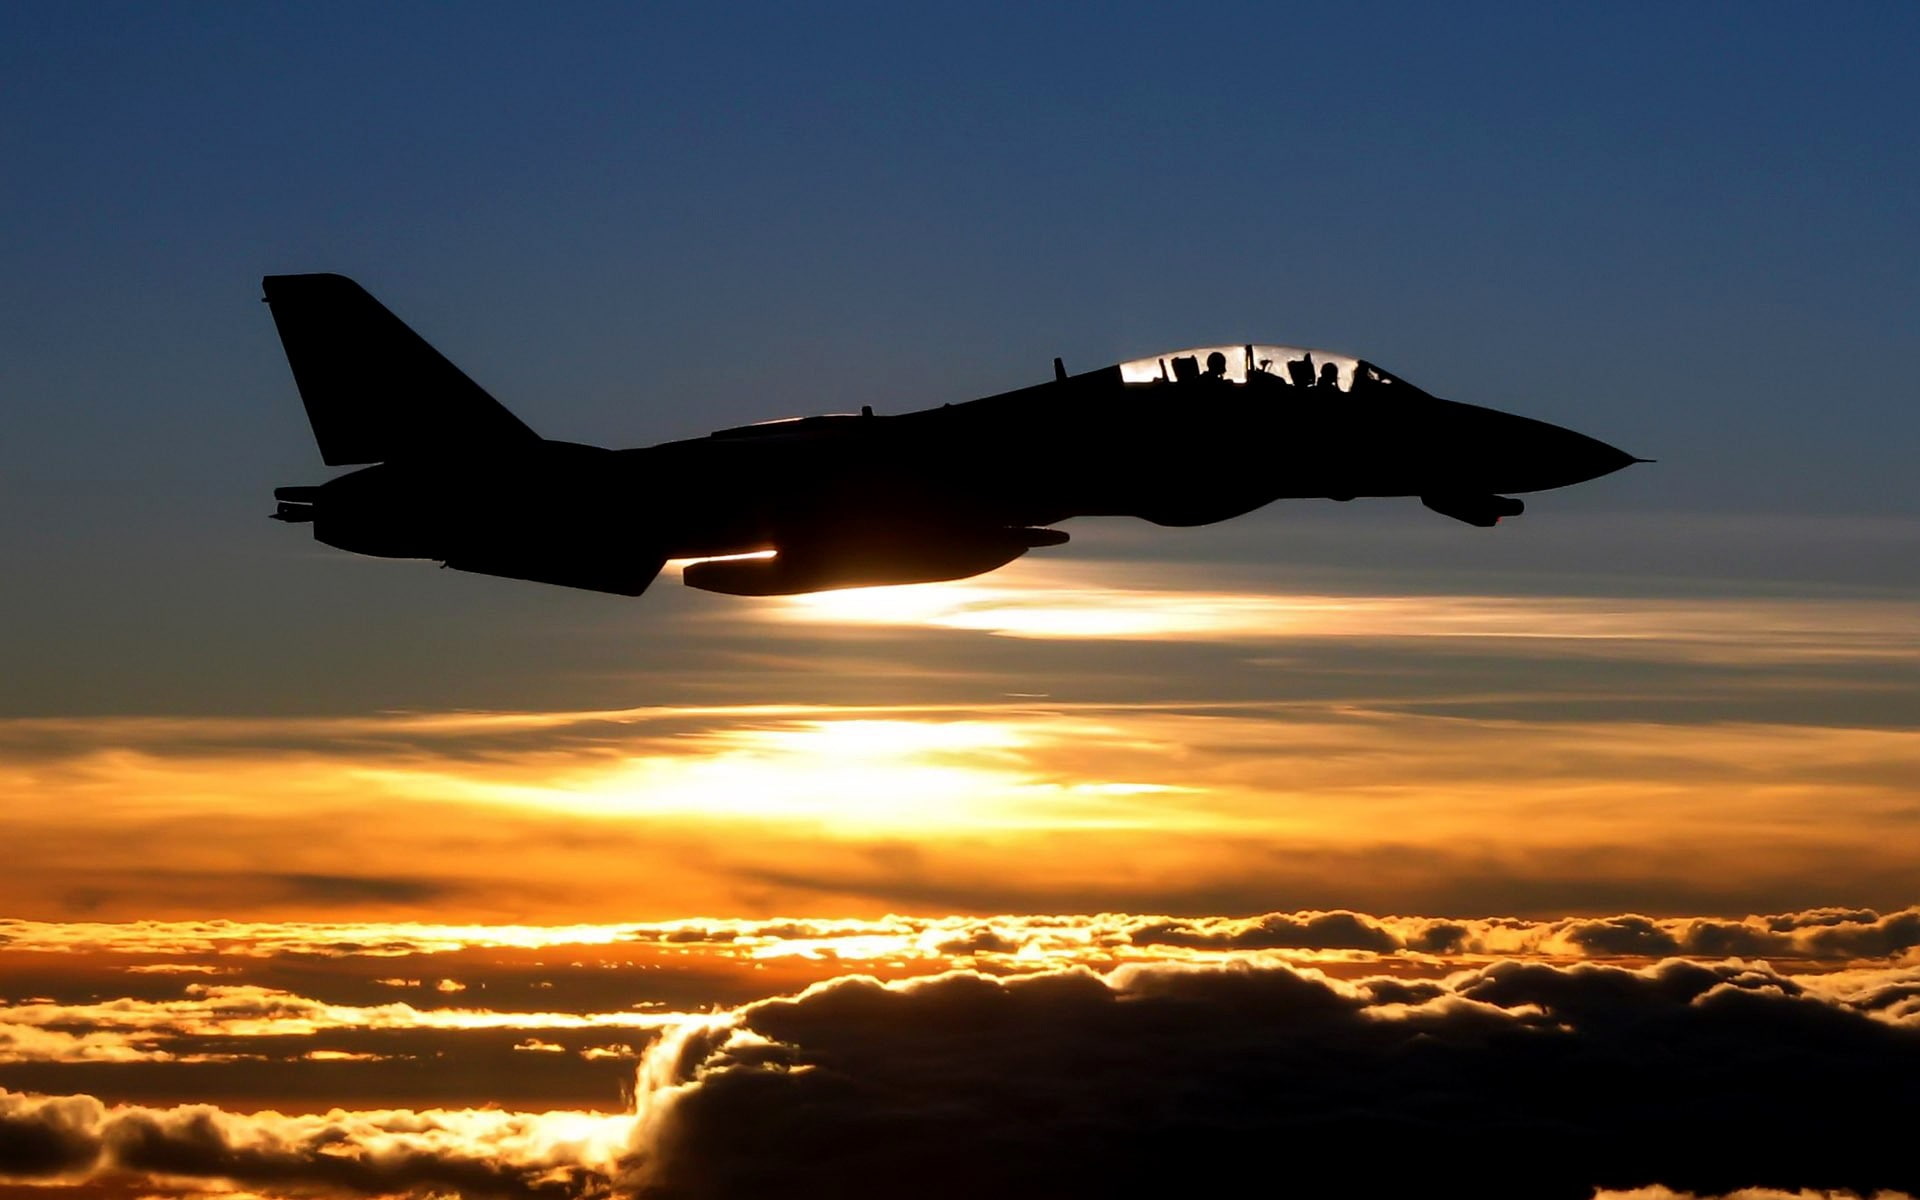 sunset, aircraft, military, vehicle, silhouette, F-14 Tomcat